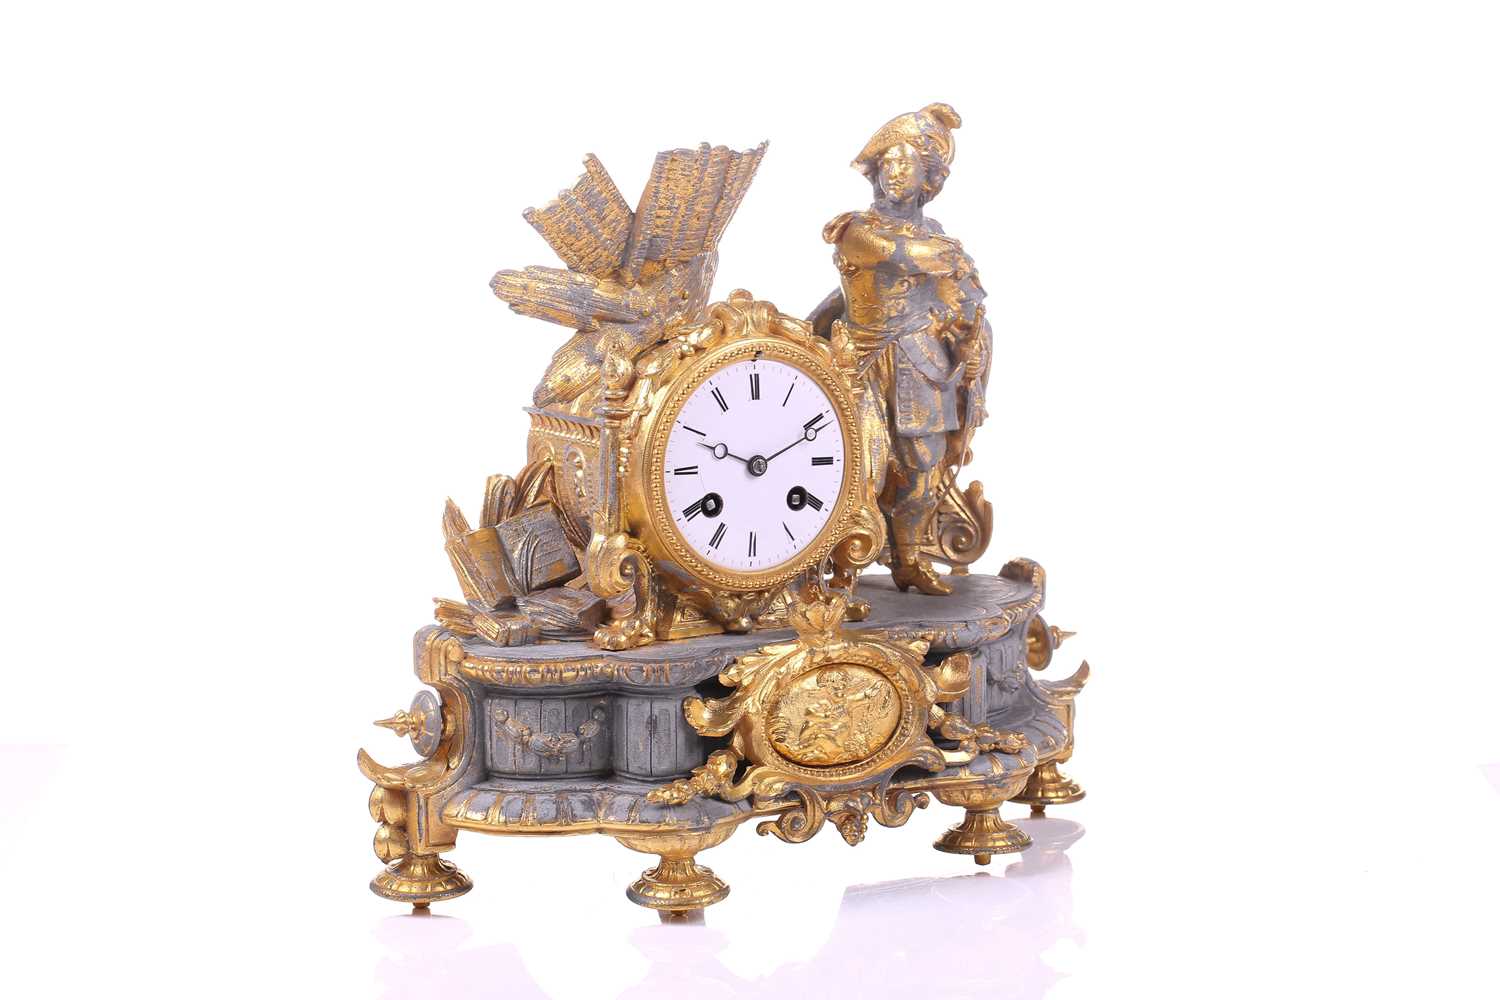 A late 19th century French parcel gilt spelter clock, depicting a nobleman standing beside a drum - Image 7 of 14